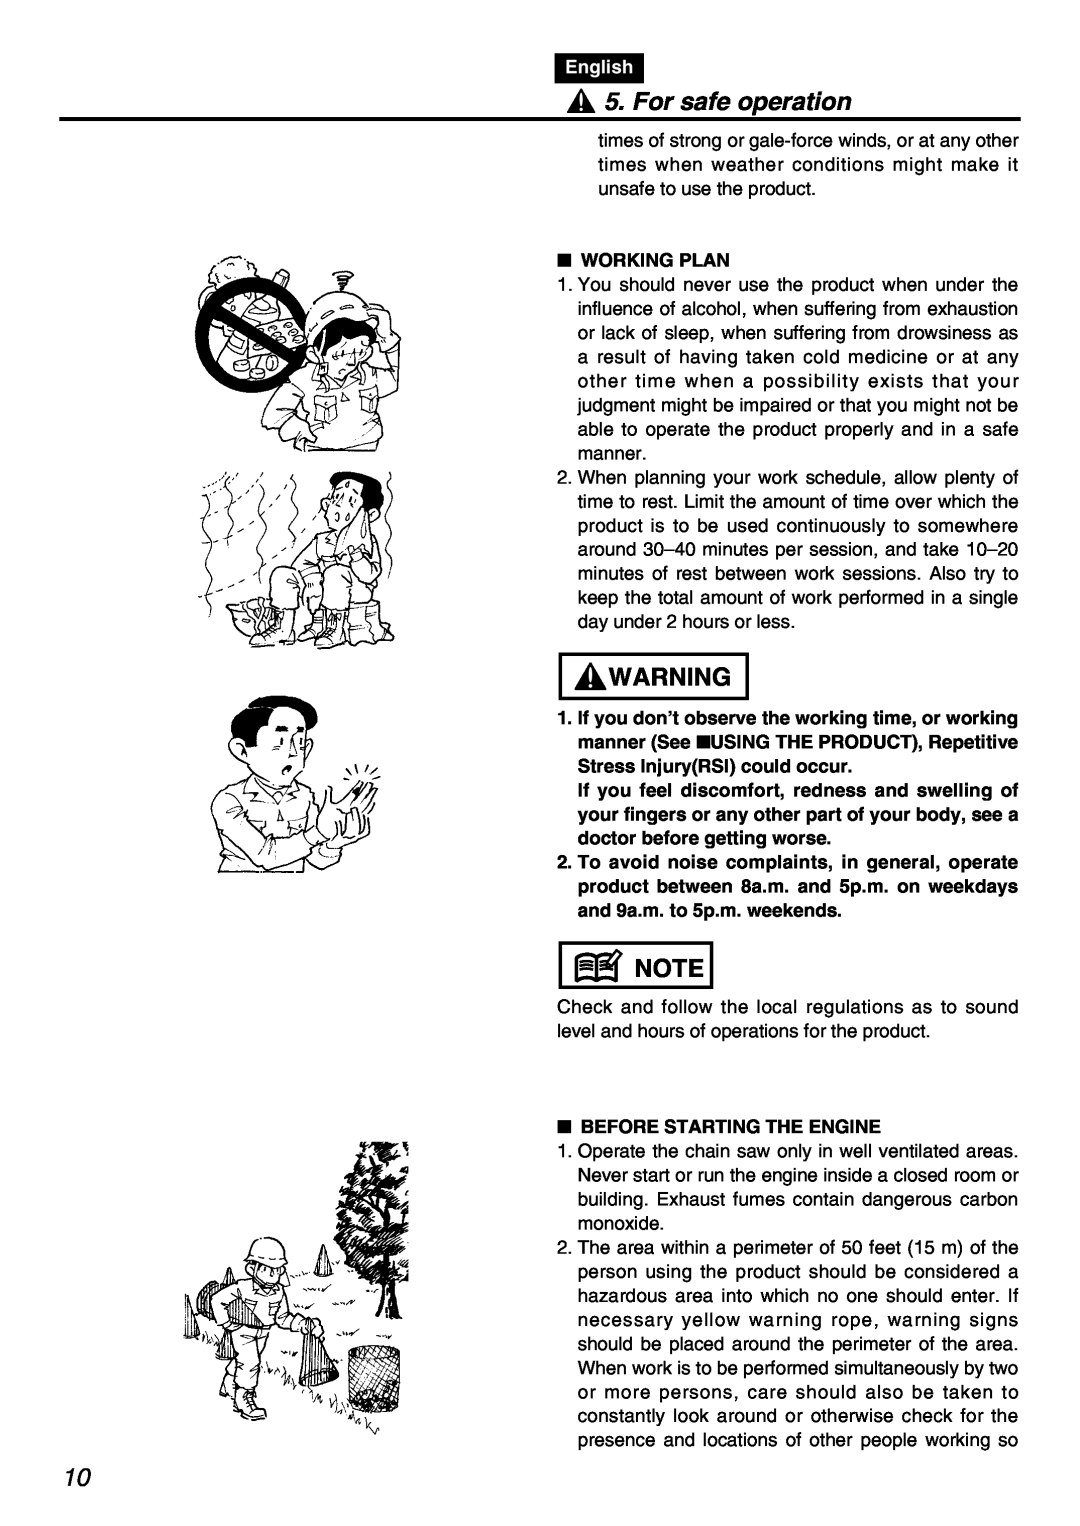 Zenoah PSZ2401 manual For safe operation, English, Working Plan, Stress InjuryRSI could occur, Before Starting The Engine 